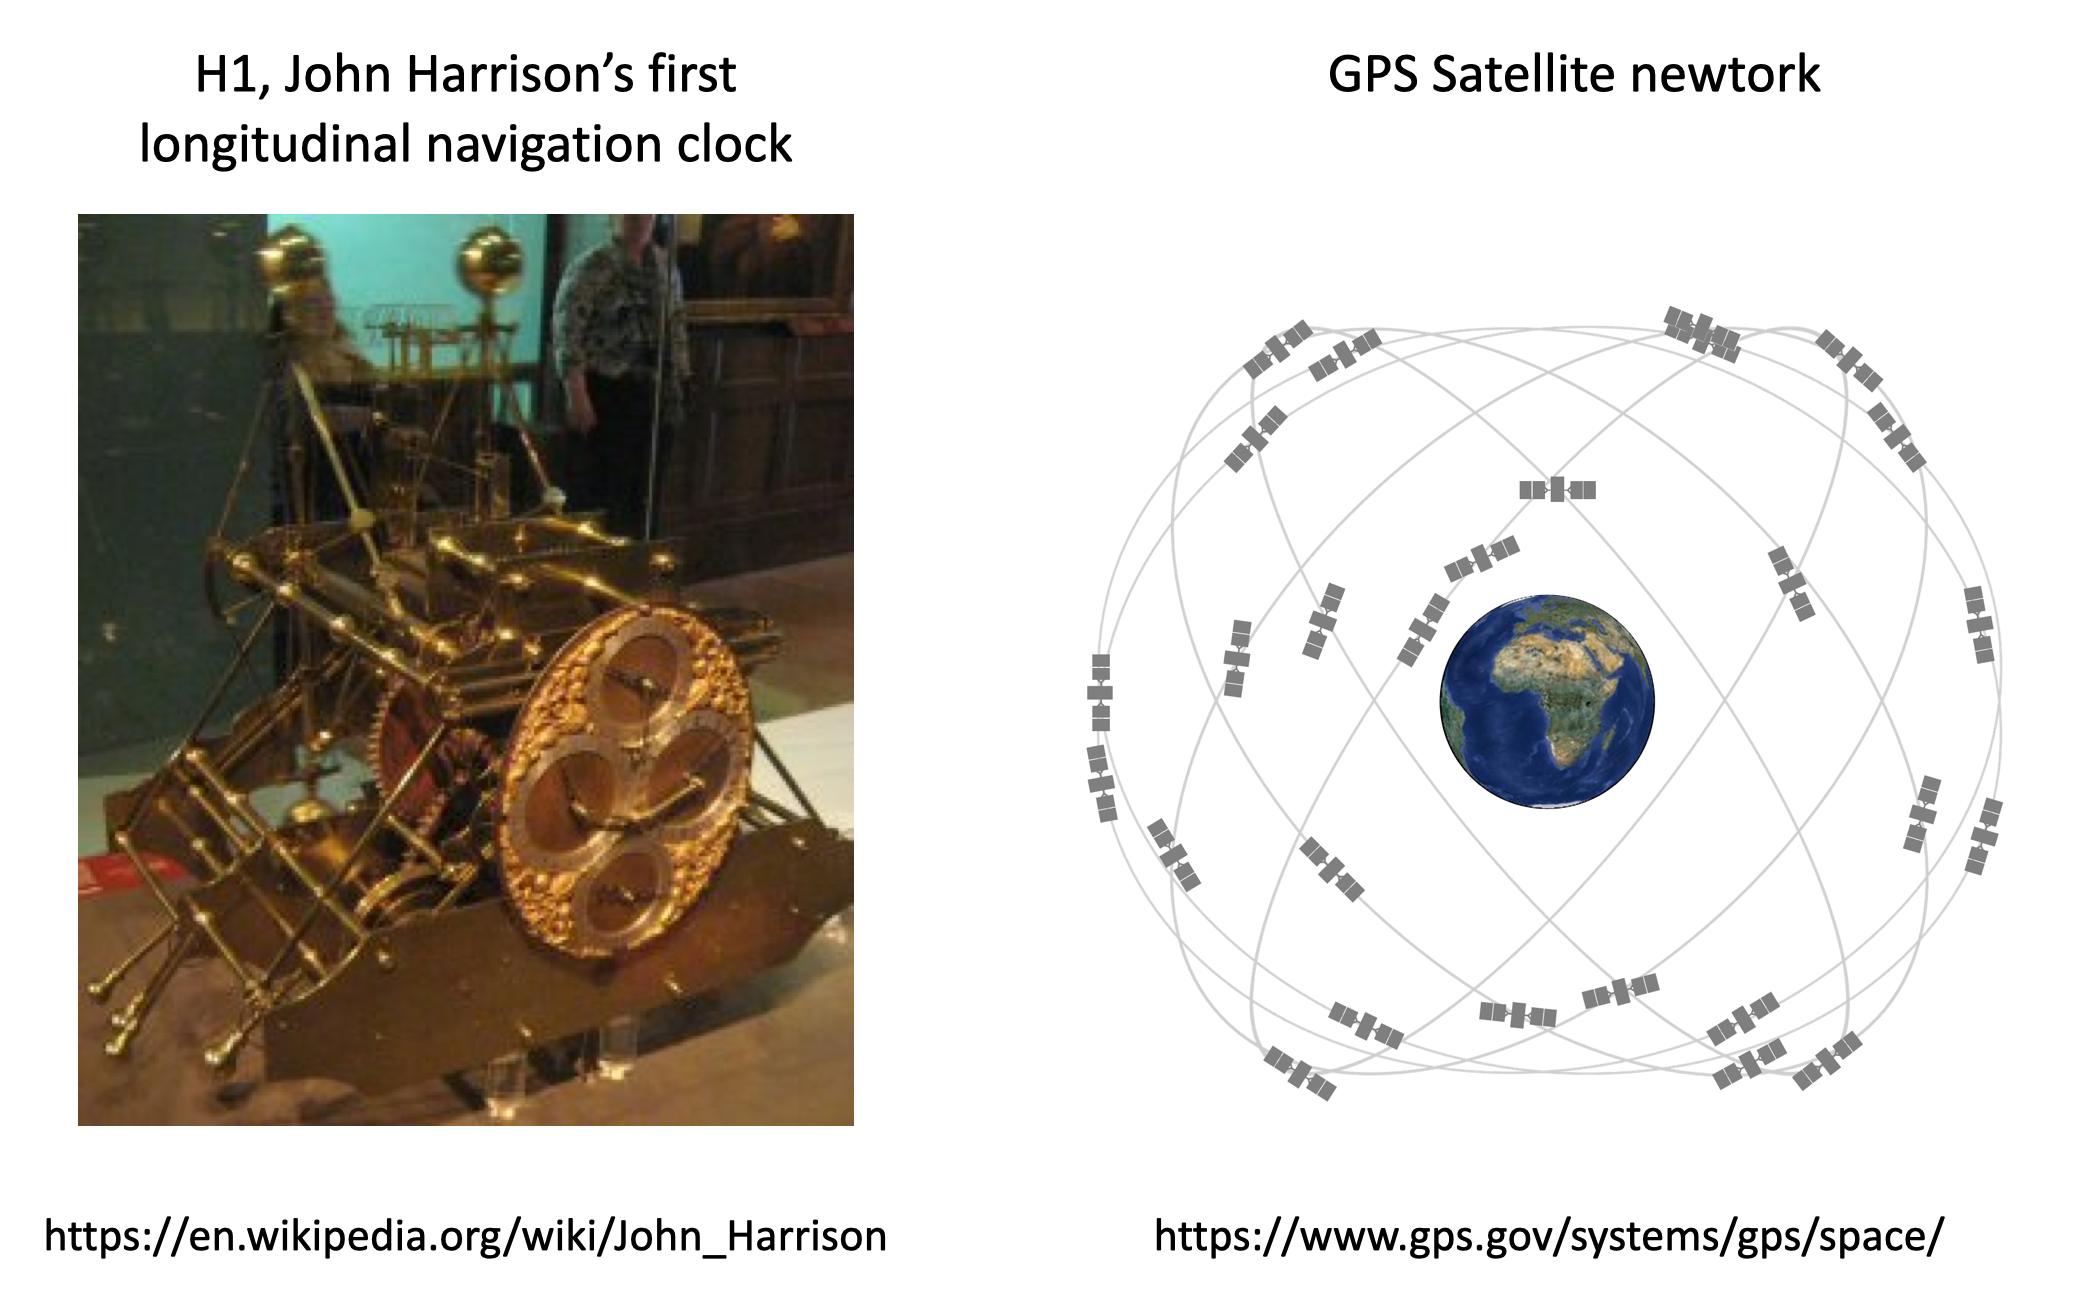 H1 and GPS